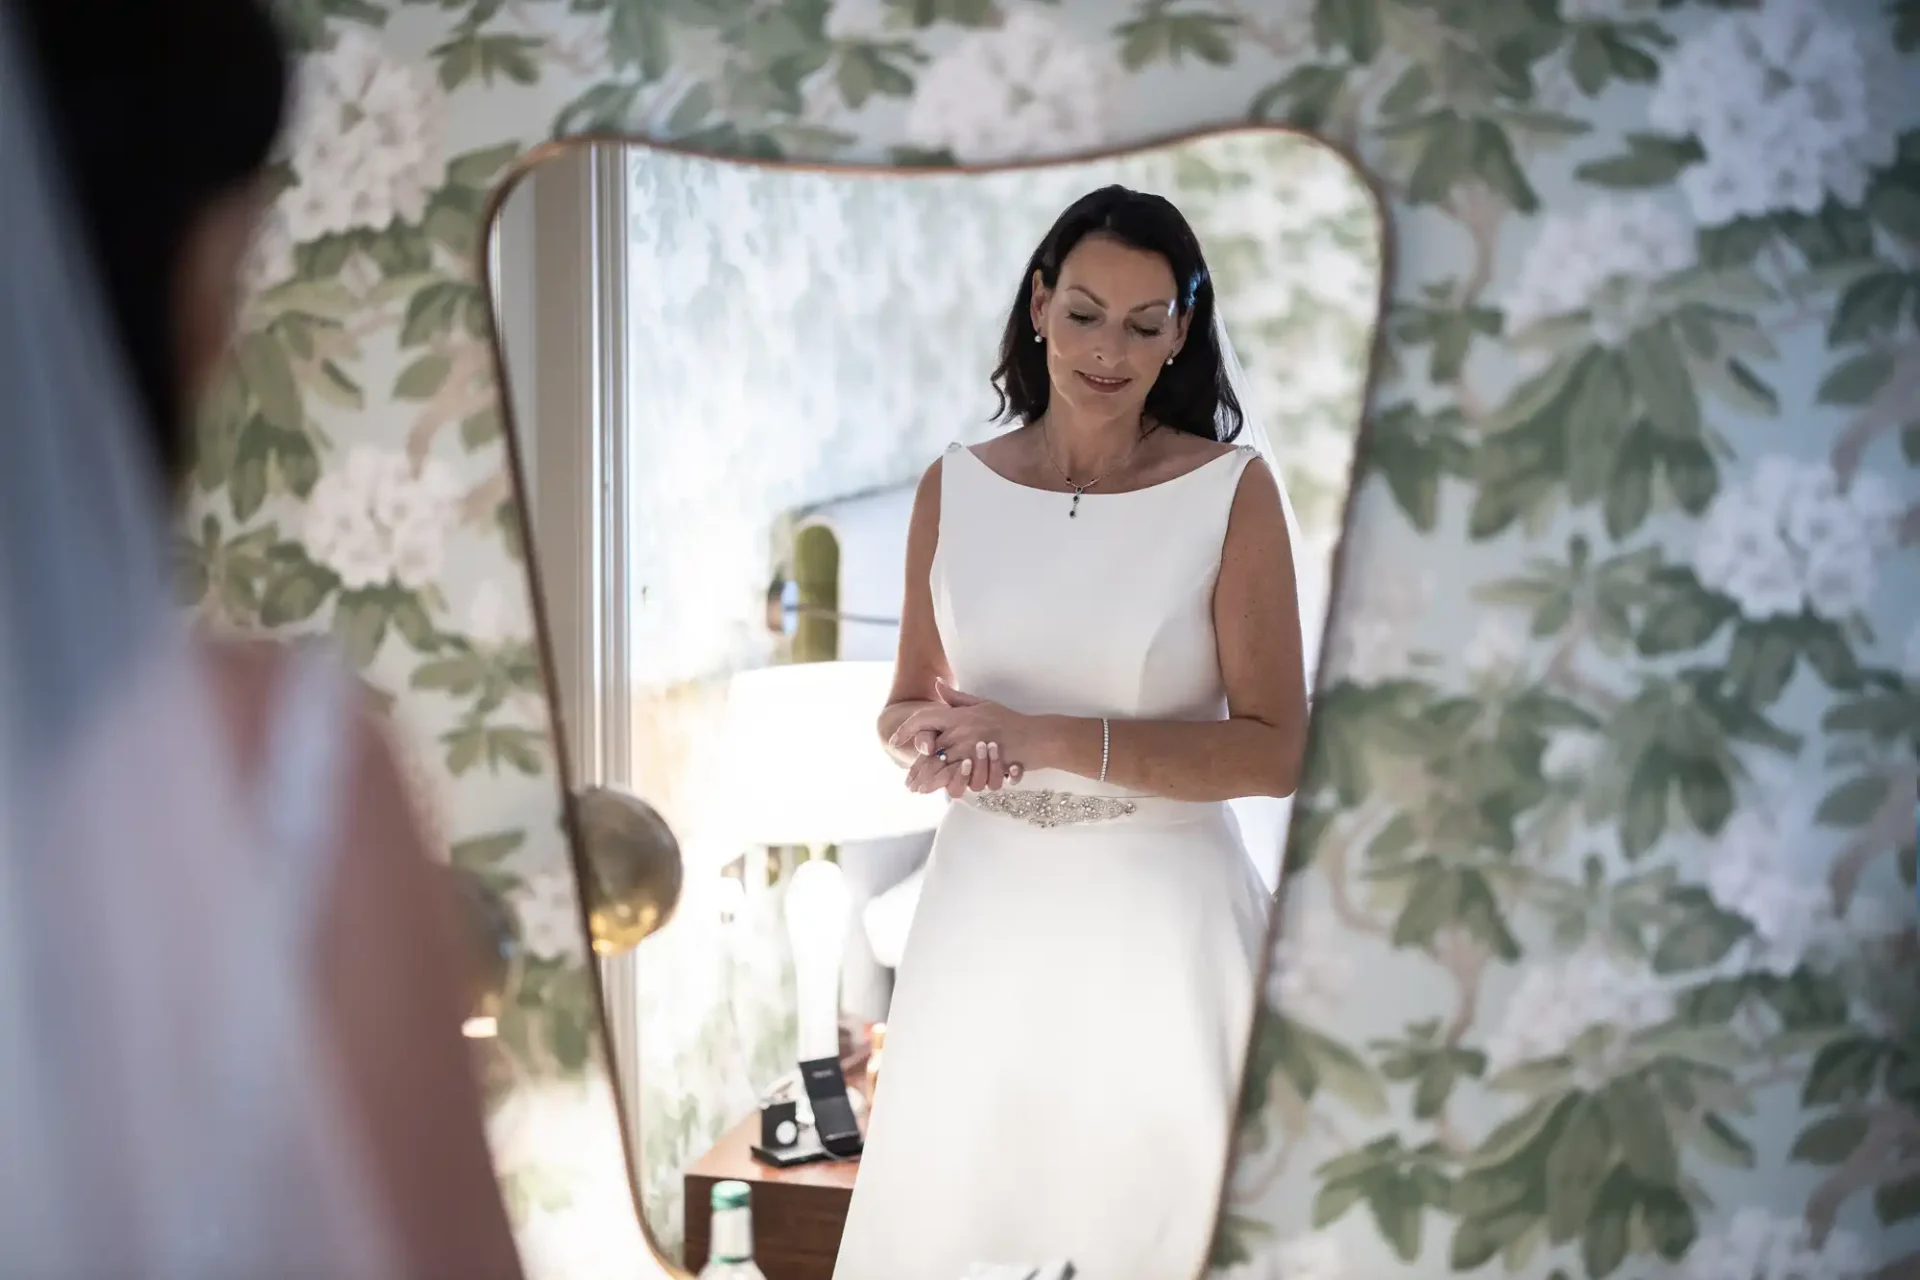 A woman in a white dress adjusts her bracelet while looking at her reflection in a mirror framed by floral wallpaper.